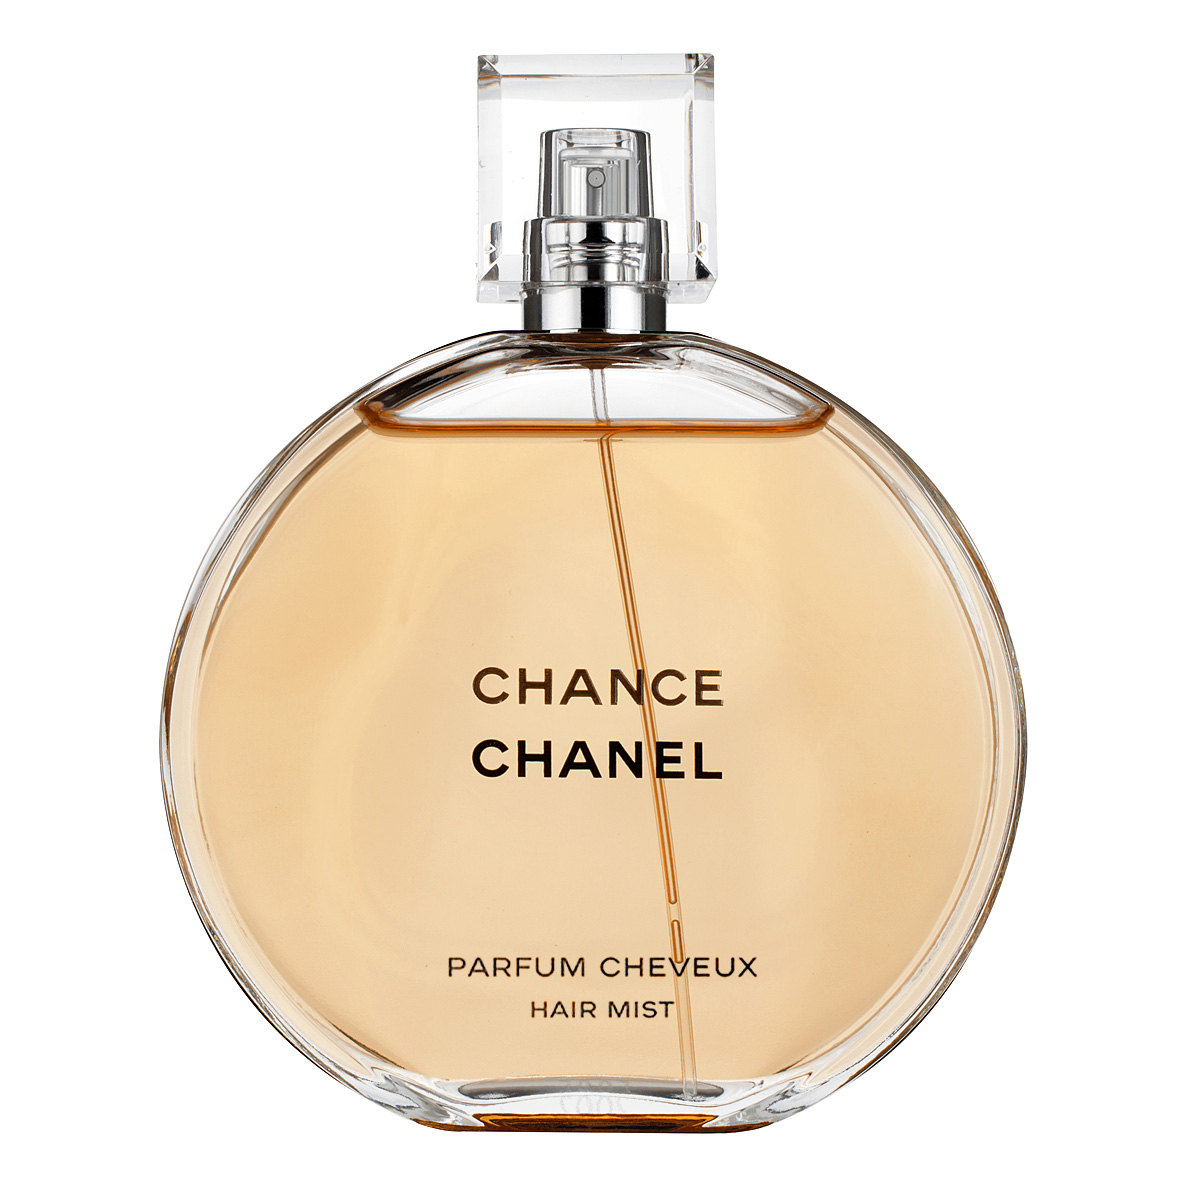 Buy for € from Beautybuys Ireland - Chanel Chance Hair Mist Spray has  a light and luxurious scent which like the fragrance opens with notes of  pink pepper, jasmine and amber patchouli.